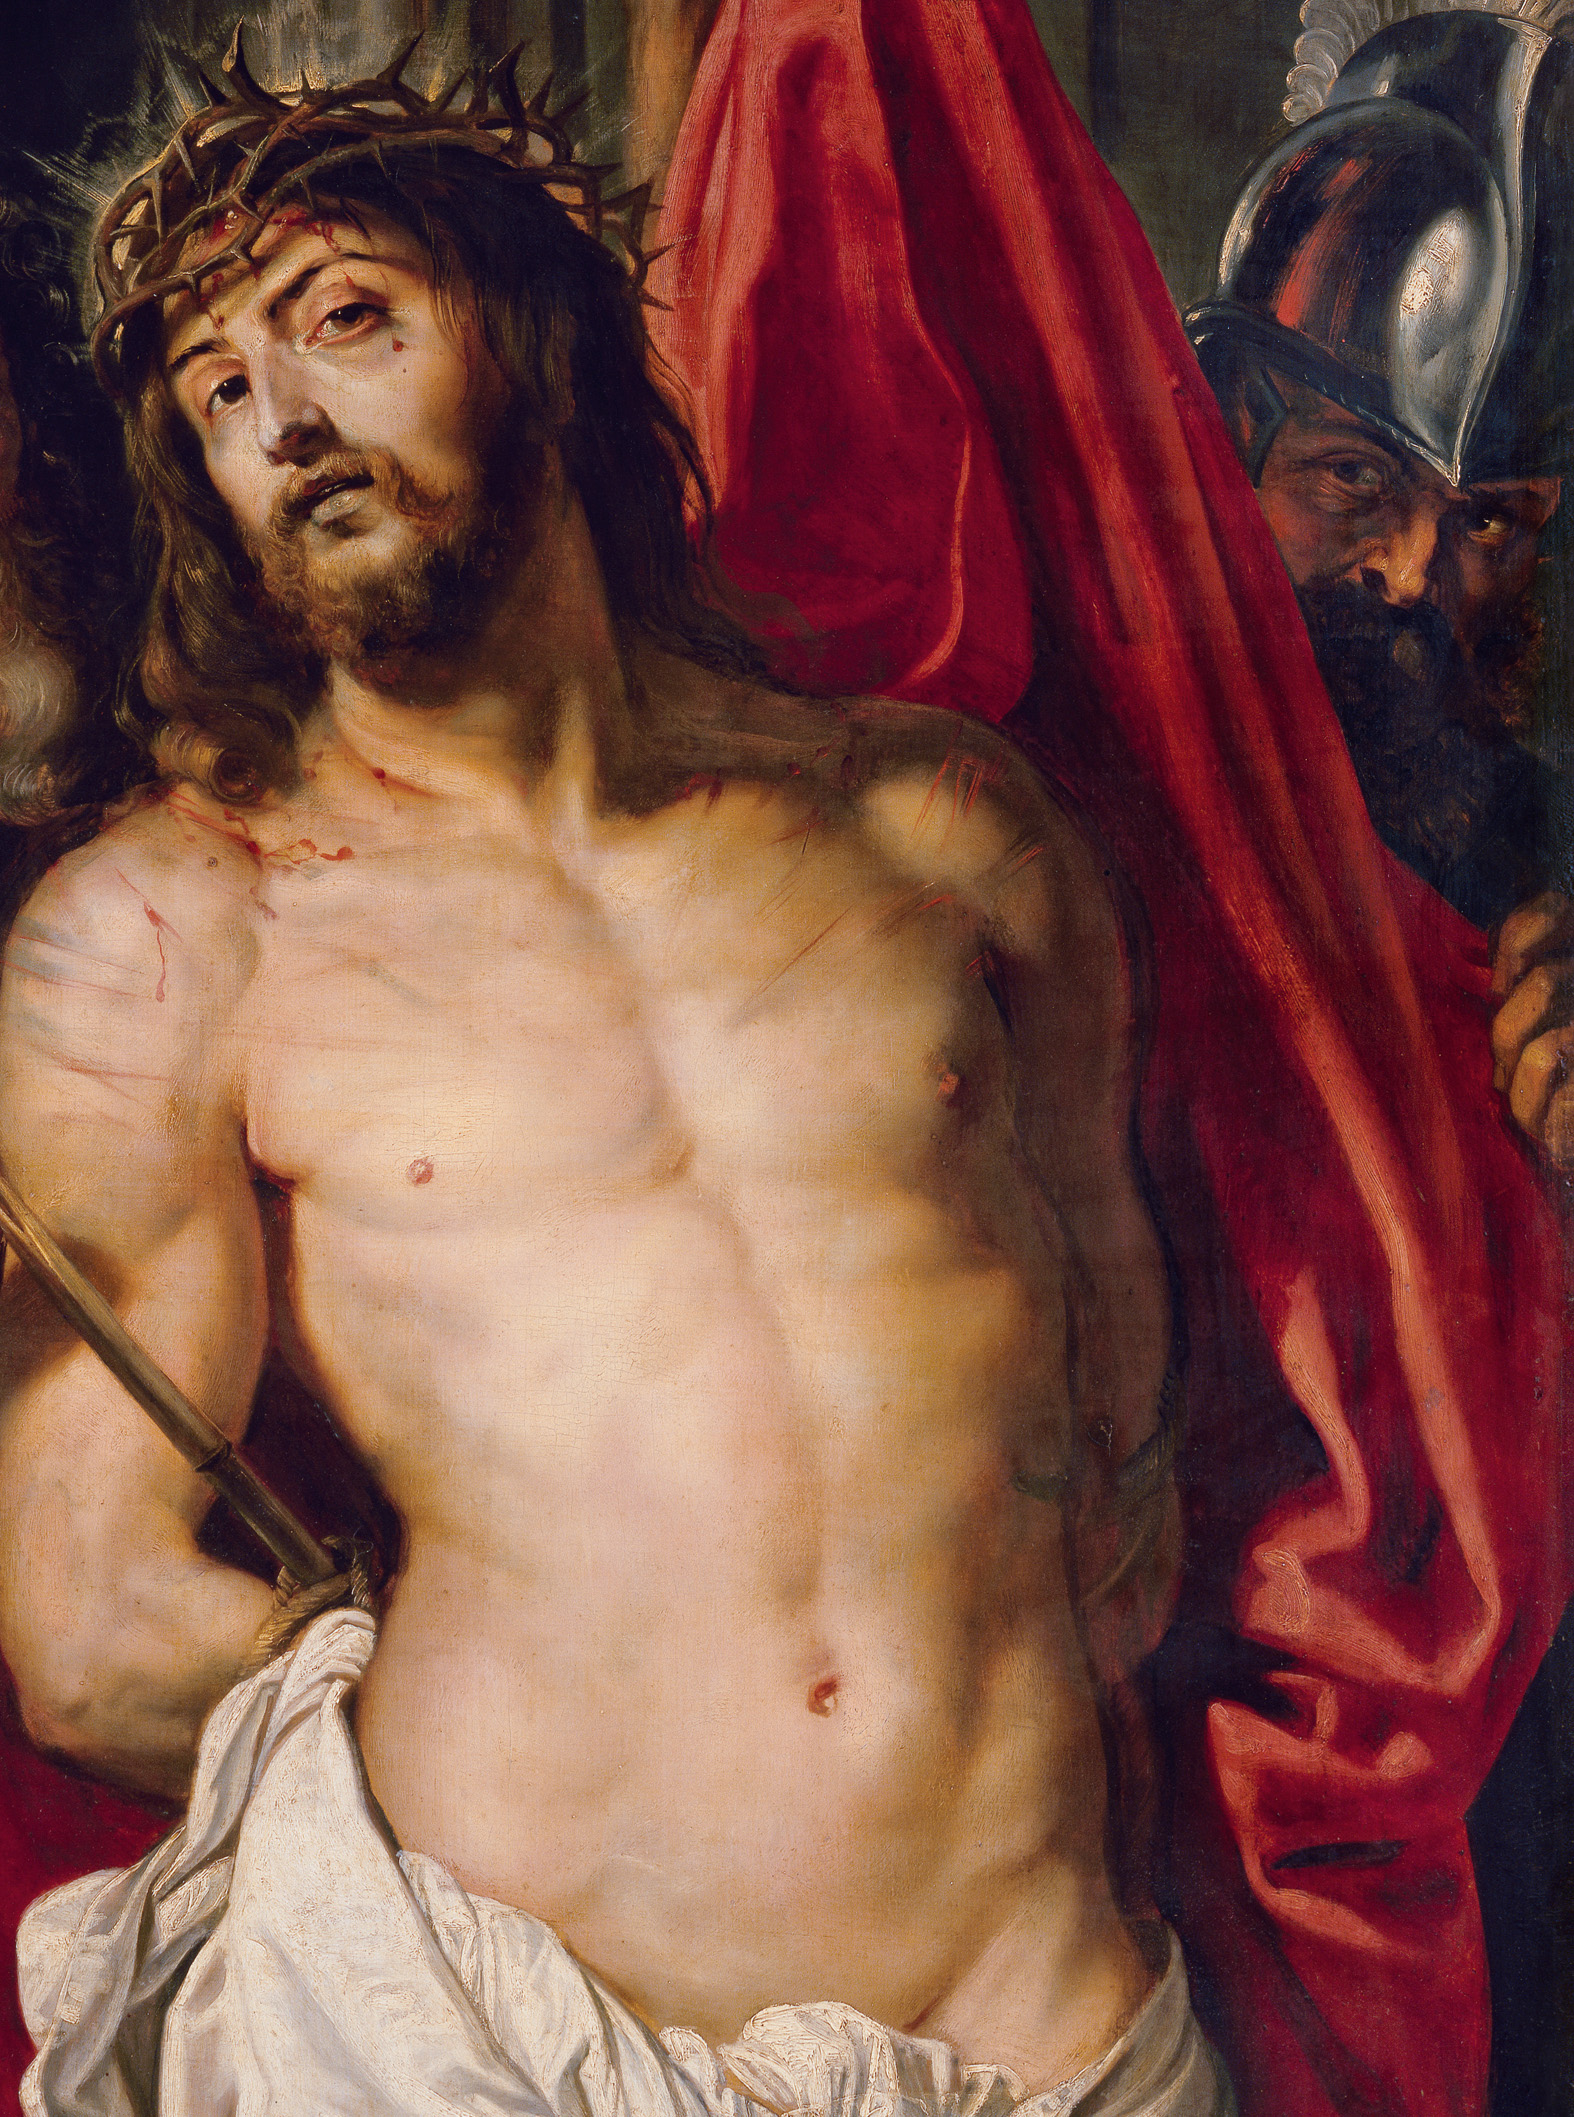 Crown of Thorns (Ecce Homo) by Peter Paul Rubens - no later than 1612 - 125.7 x 96 cm Kunsthistorisches Museum